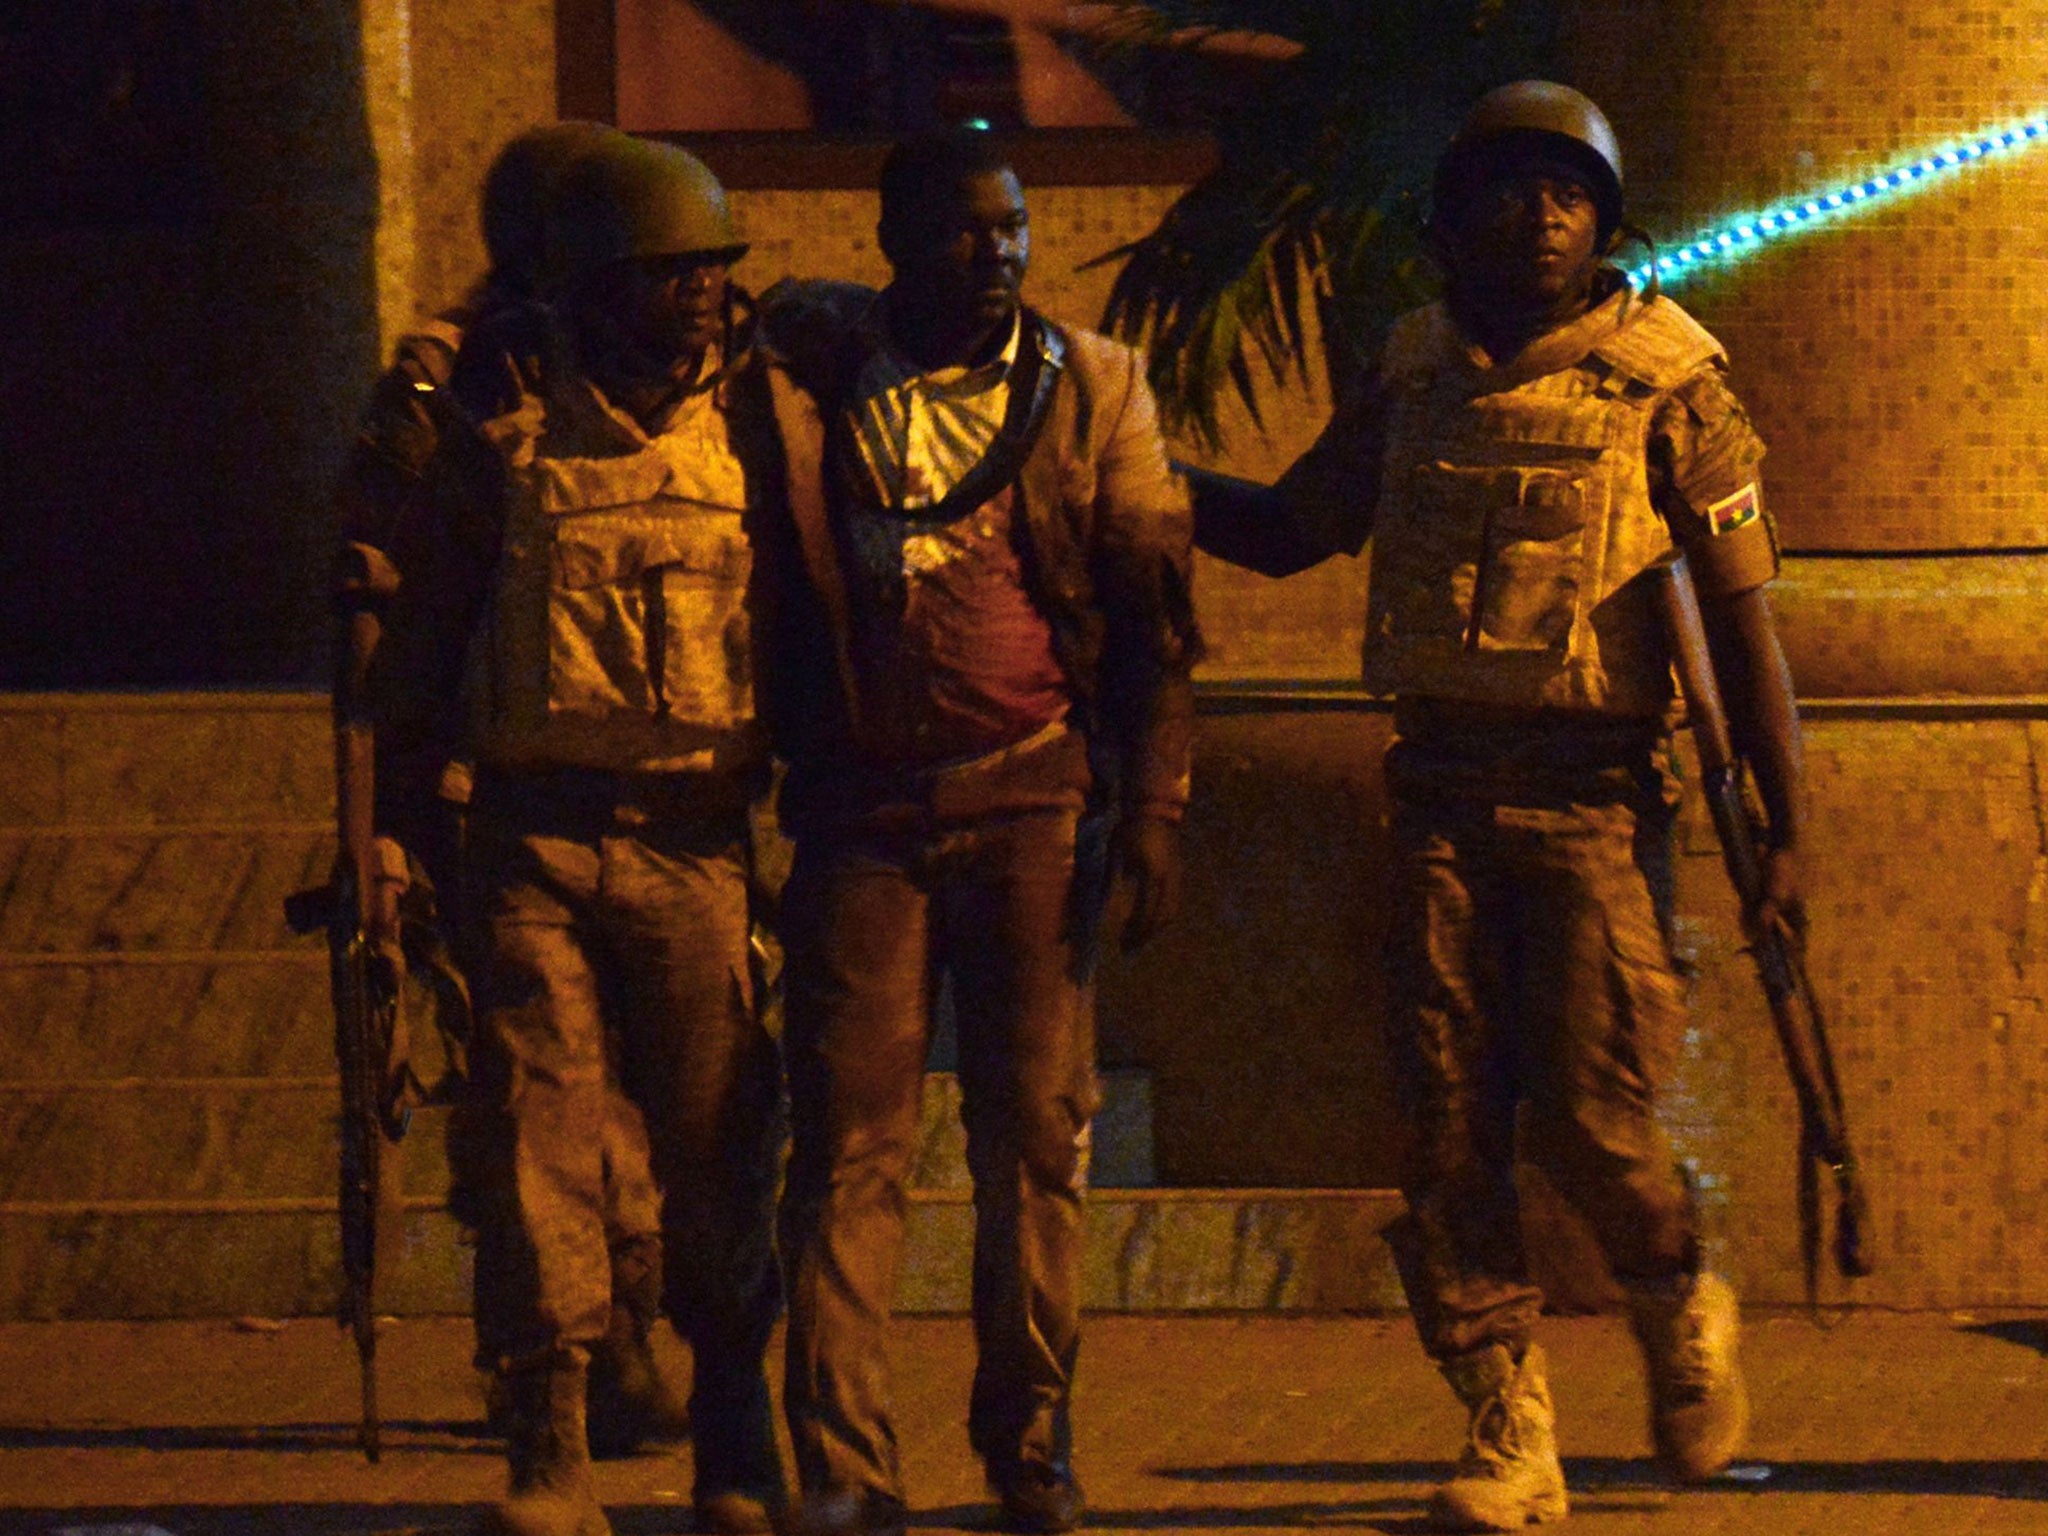 Burkina Faso's soldiers evacuate an injured man (3rd L) from the Splendid hotel during an attack on both the hotel and a restaurant by Al-Qaeda linked gunmen late on January 15, 2016.